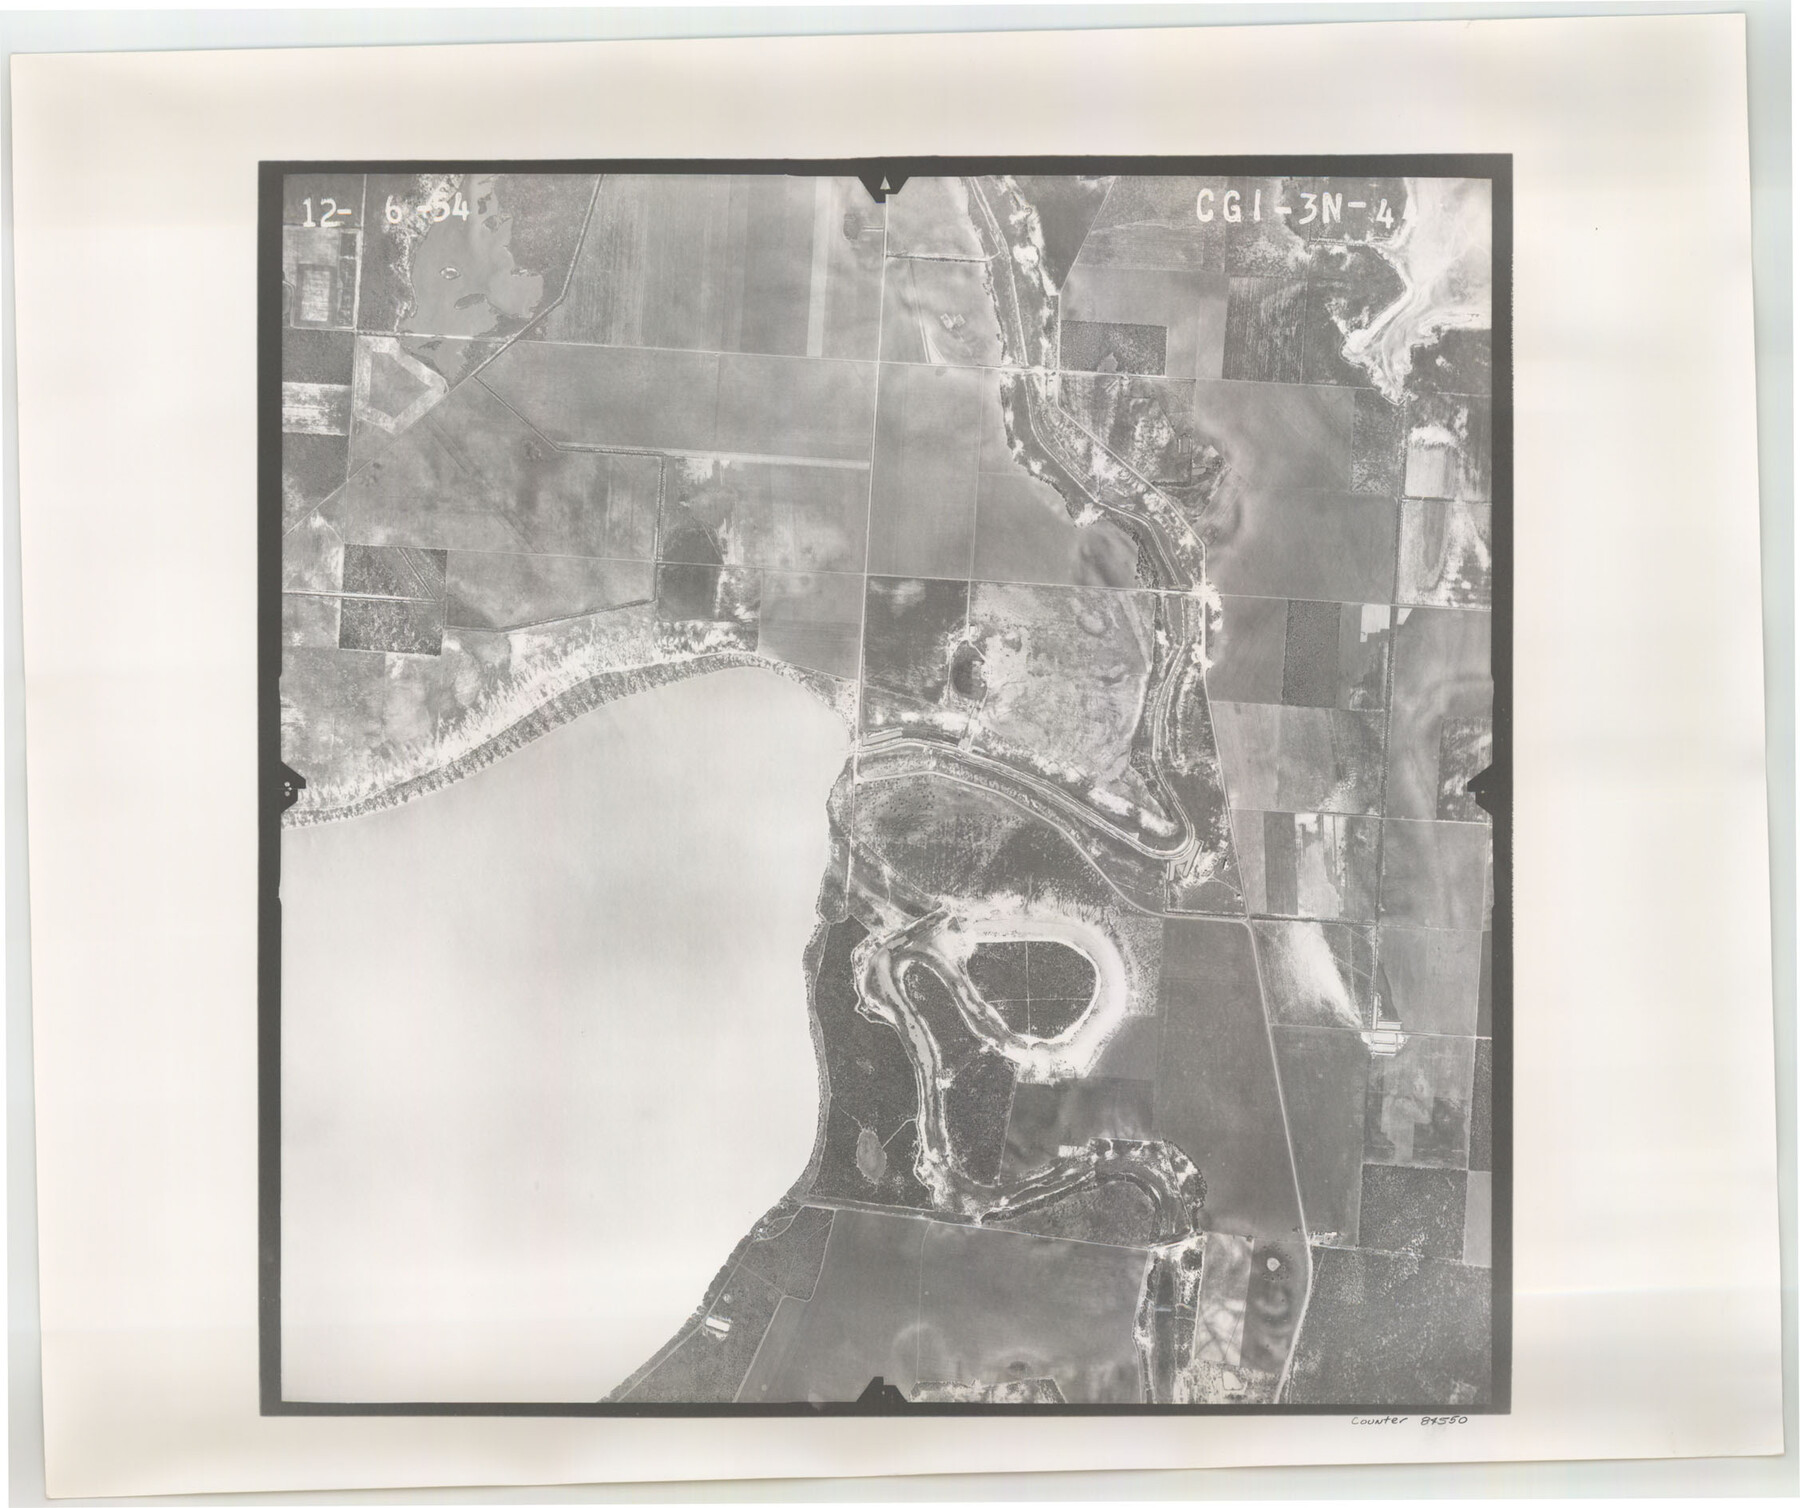 84550, Flight Mission No. CGI-3N, Frame 44, Cameron County, General Map Collection